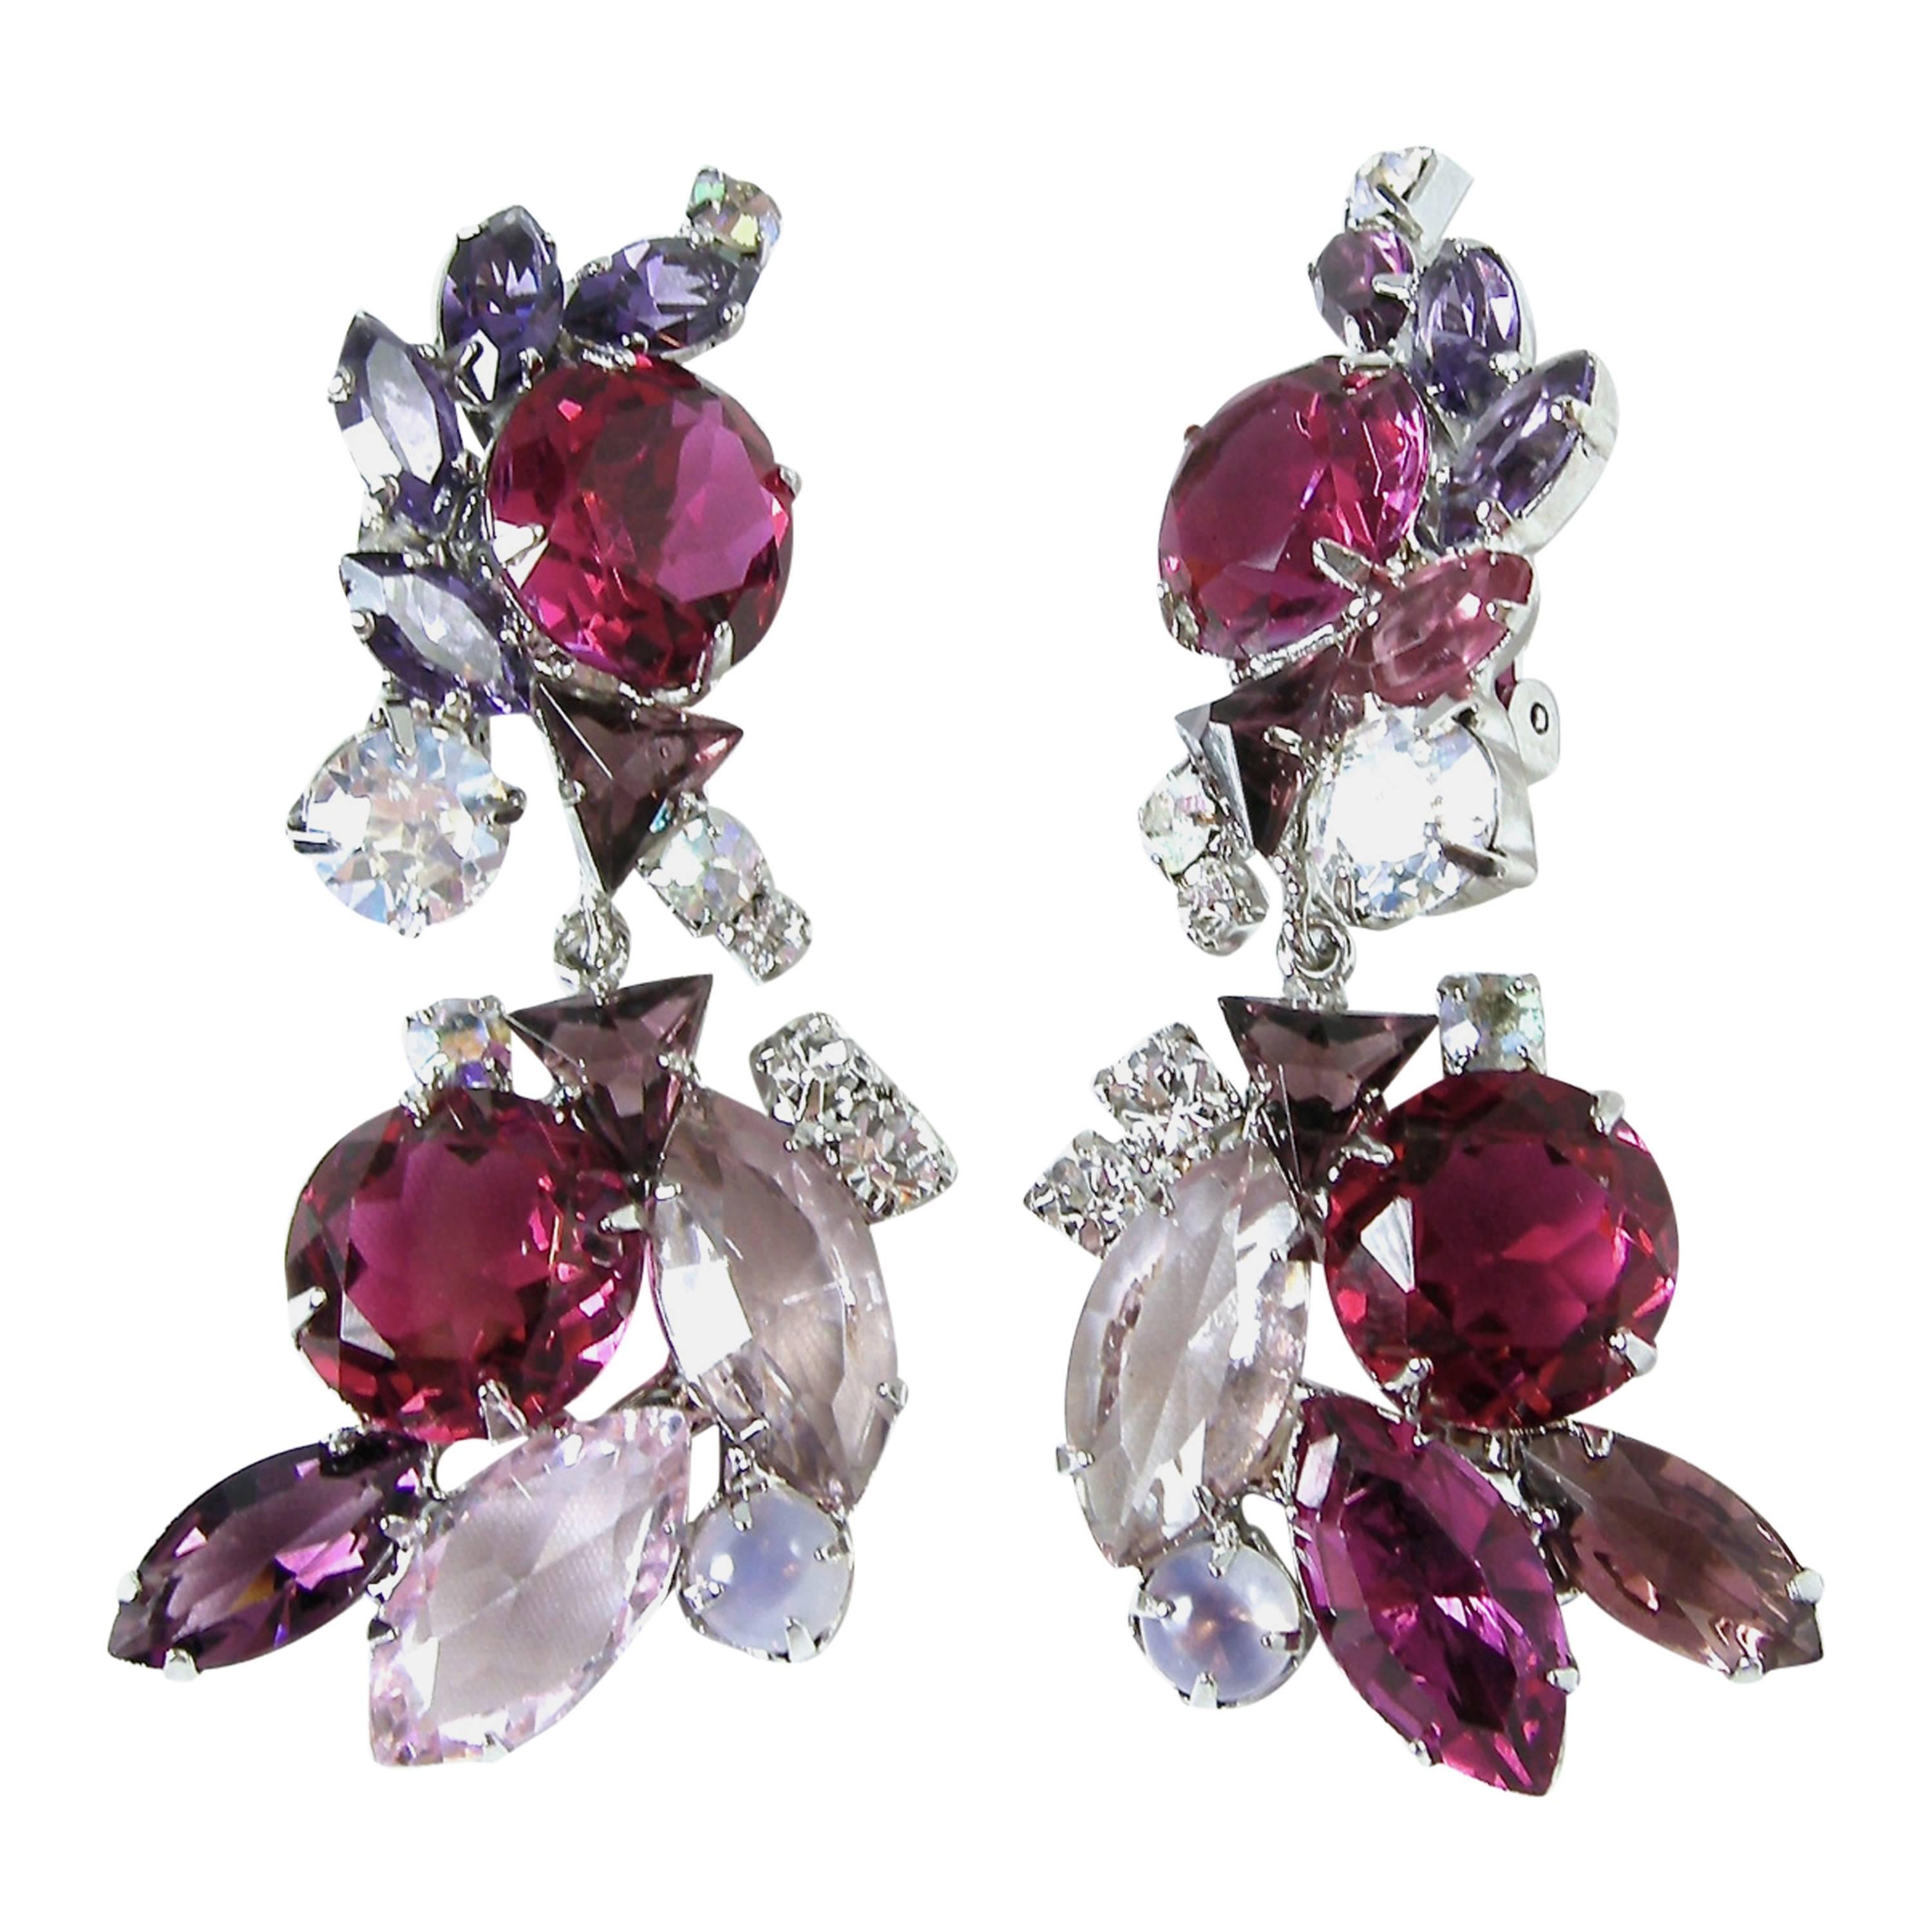 “One-of-a-Kind” Robert Sorrell Red Crystal Dangling Earrings